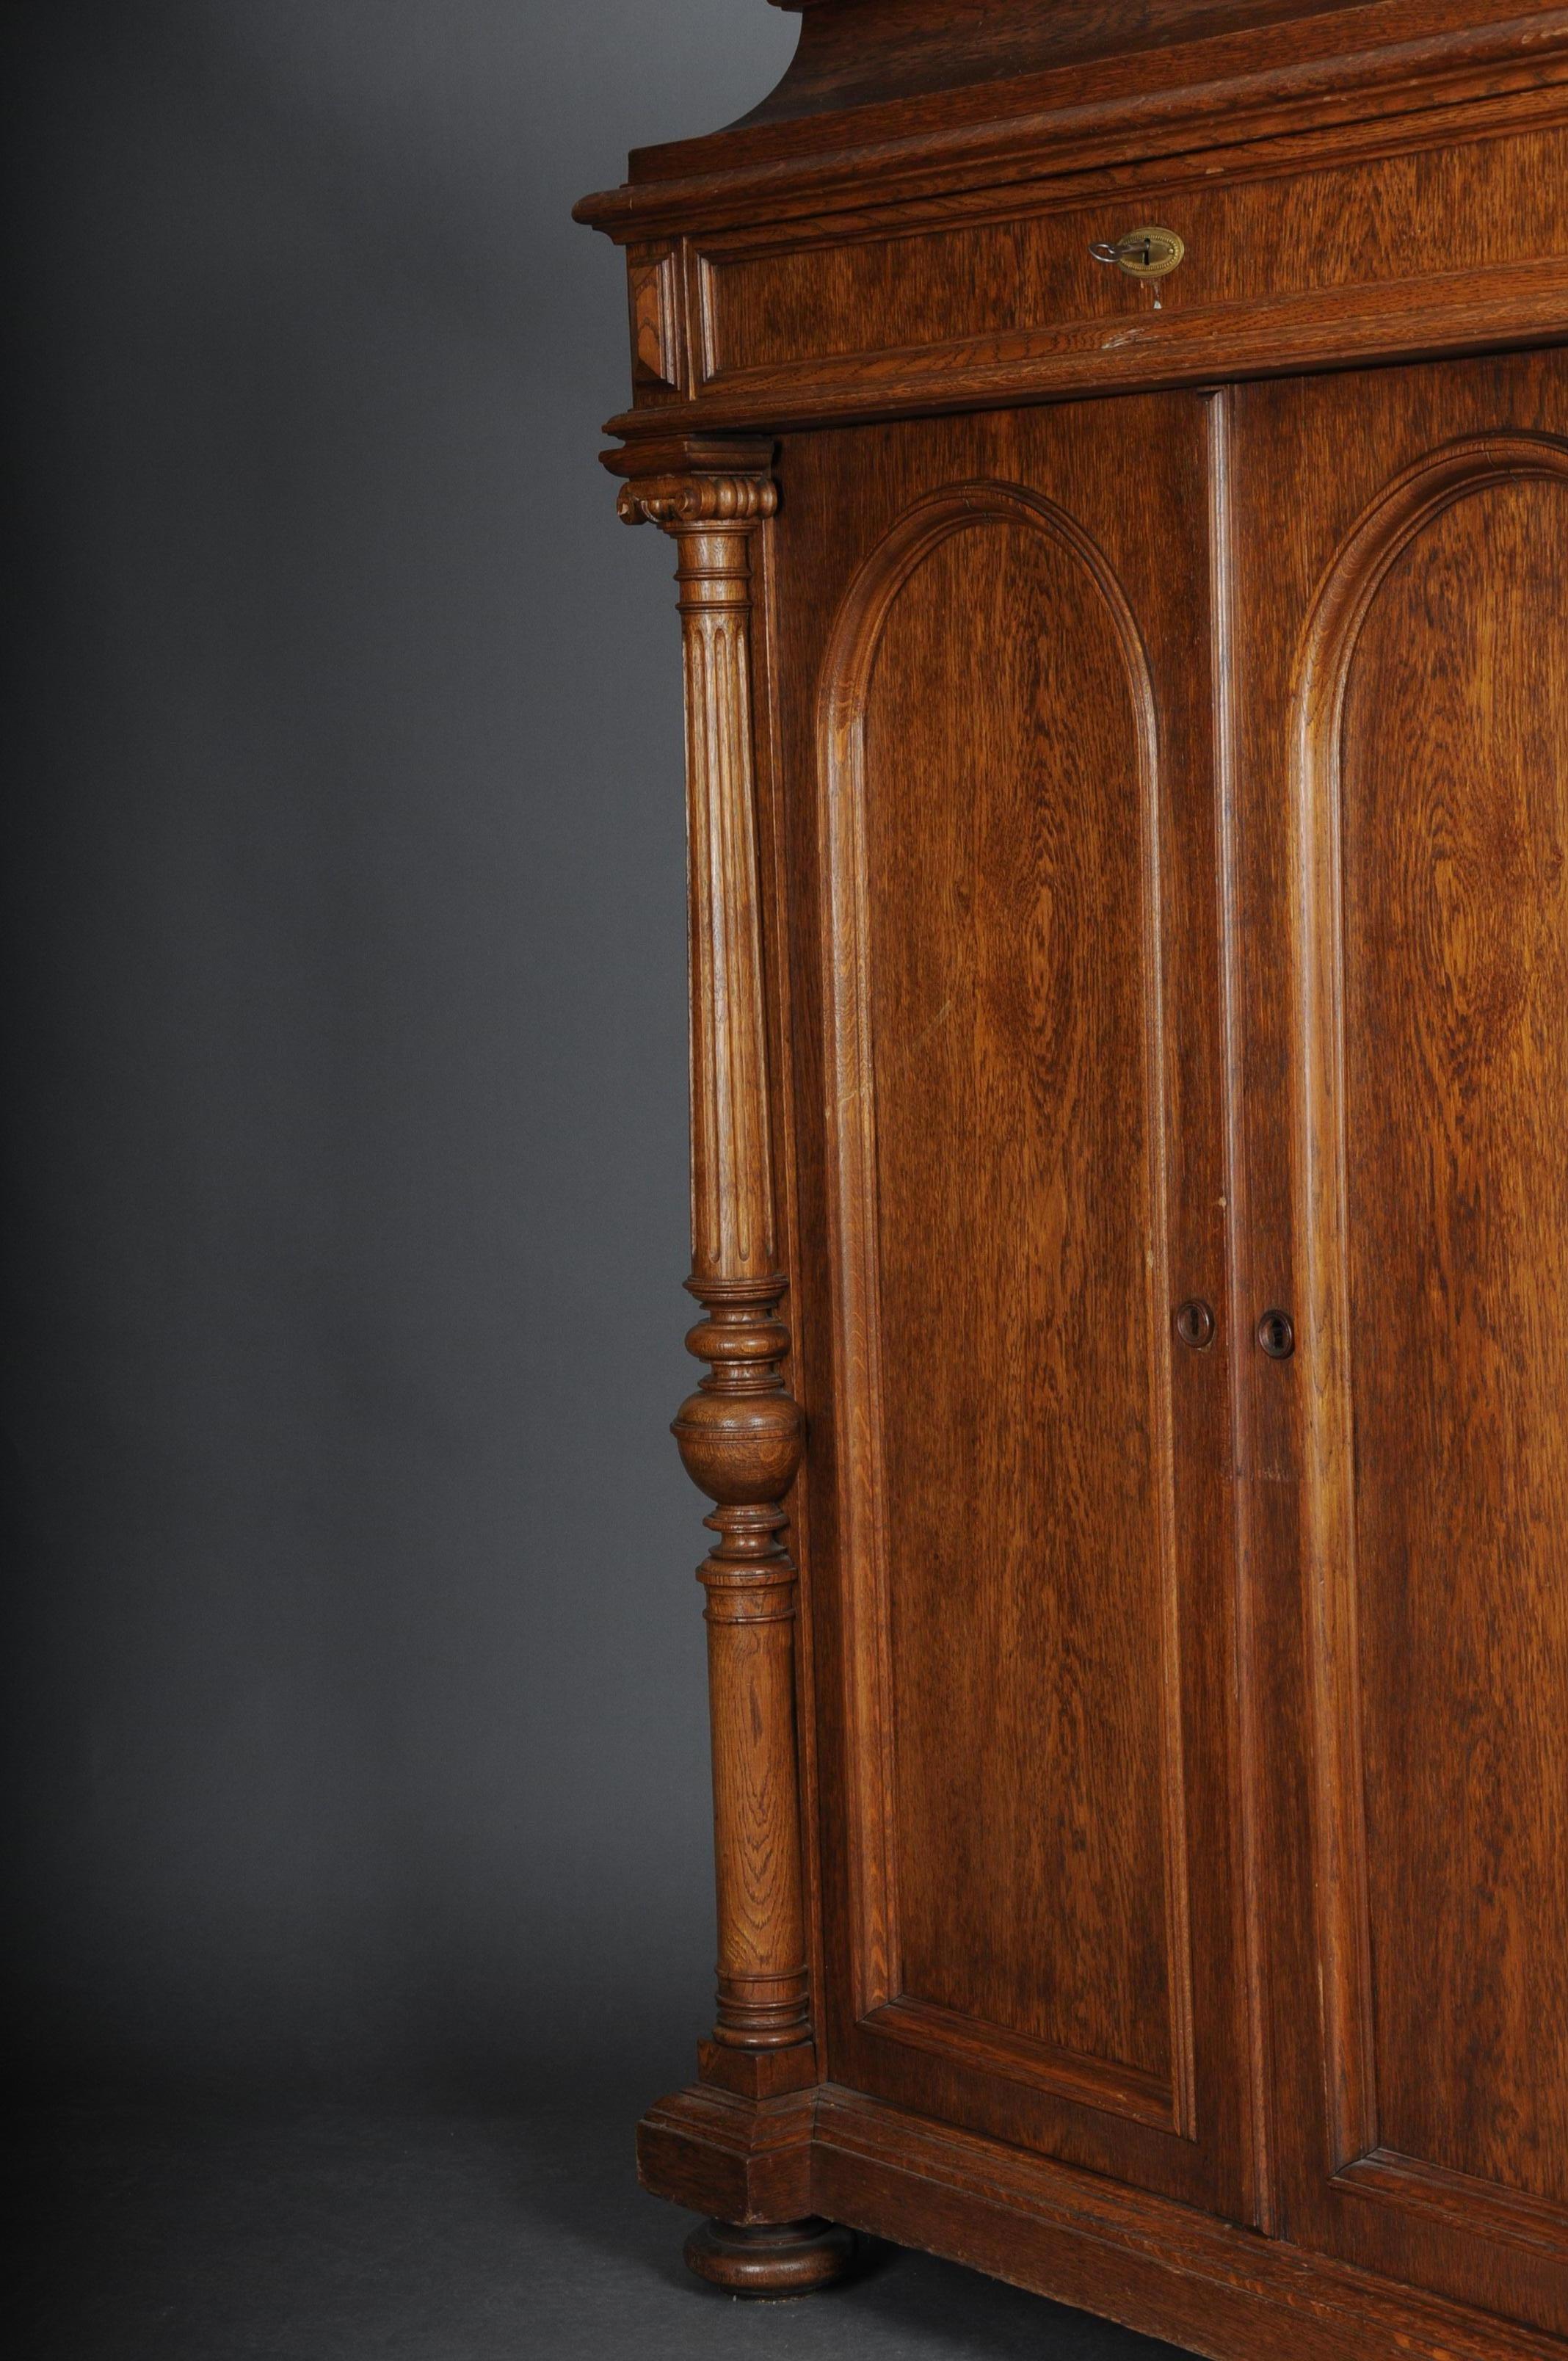 Historicism cabinet / Vertiko circa 1870, light oak

Solid wood with light oak. Rectangular body. 2 doors. Flanked by 2 carved full columns. With 3 extension leaves. Above a drawer box.

(O-225.